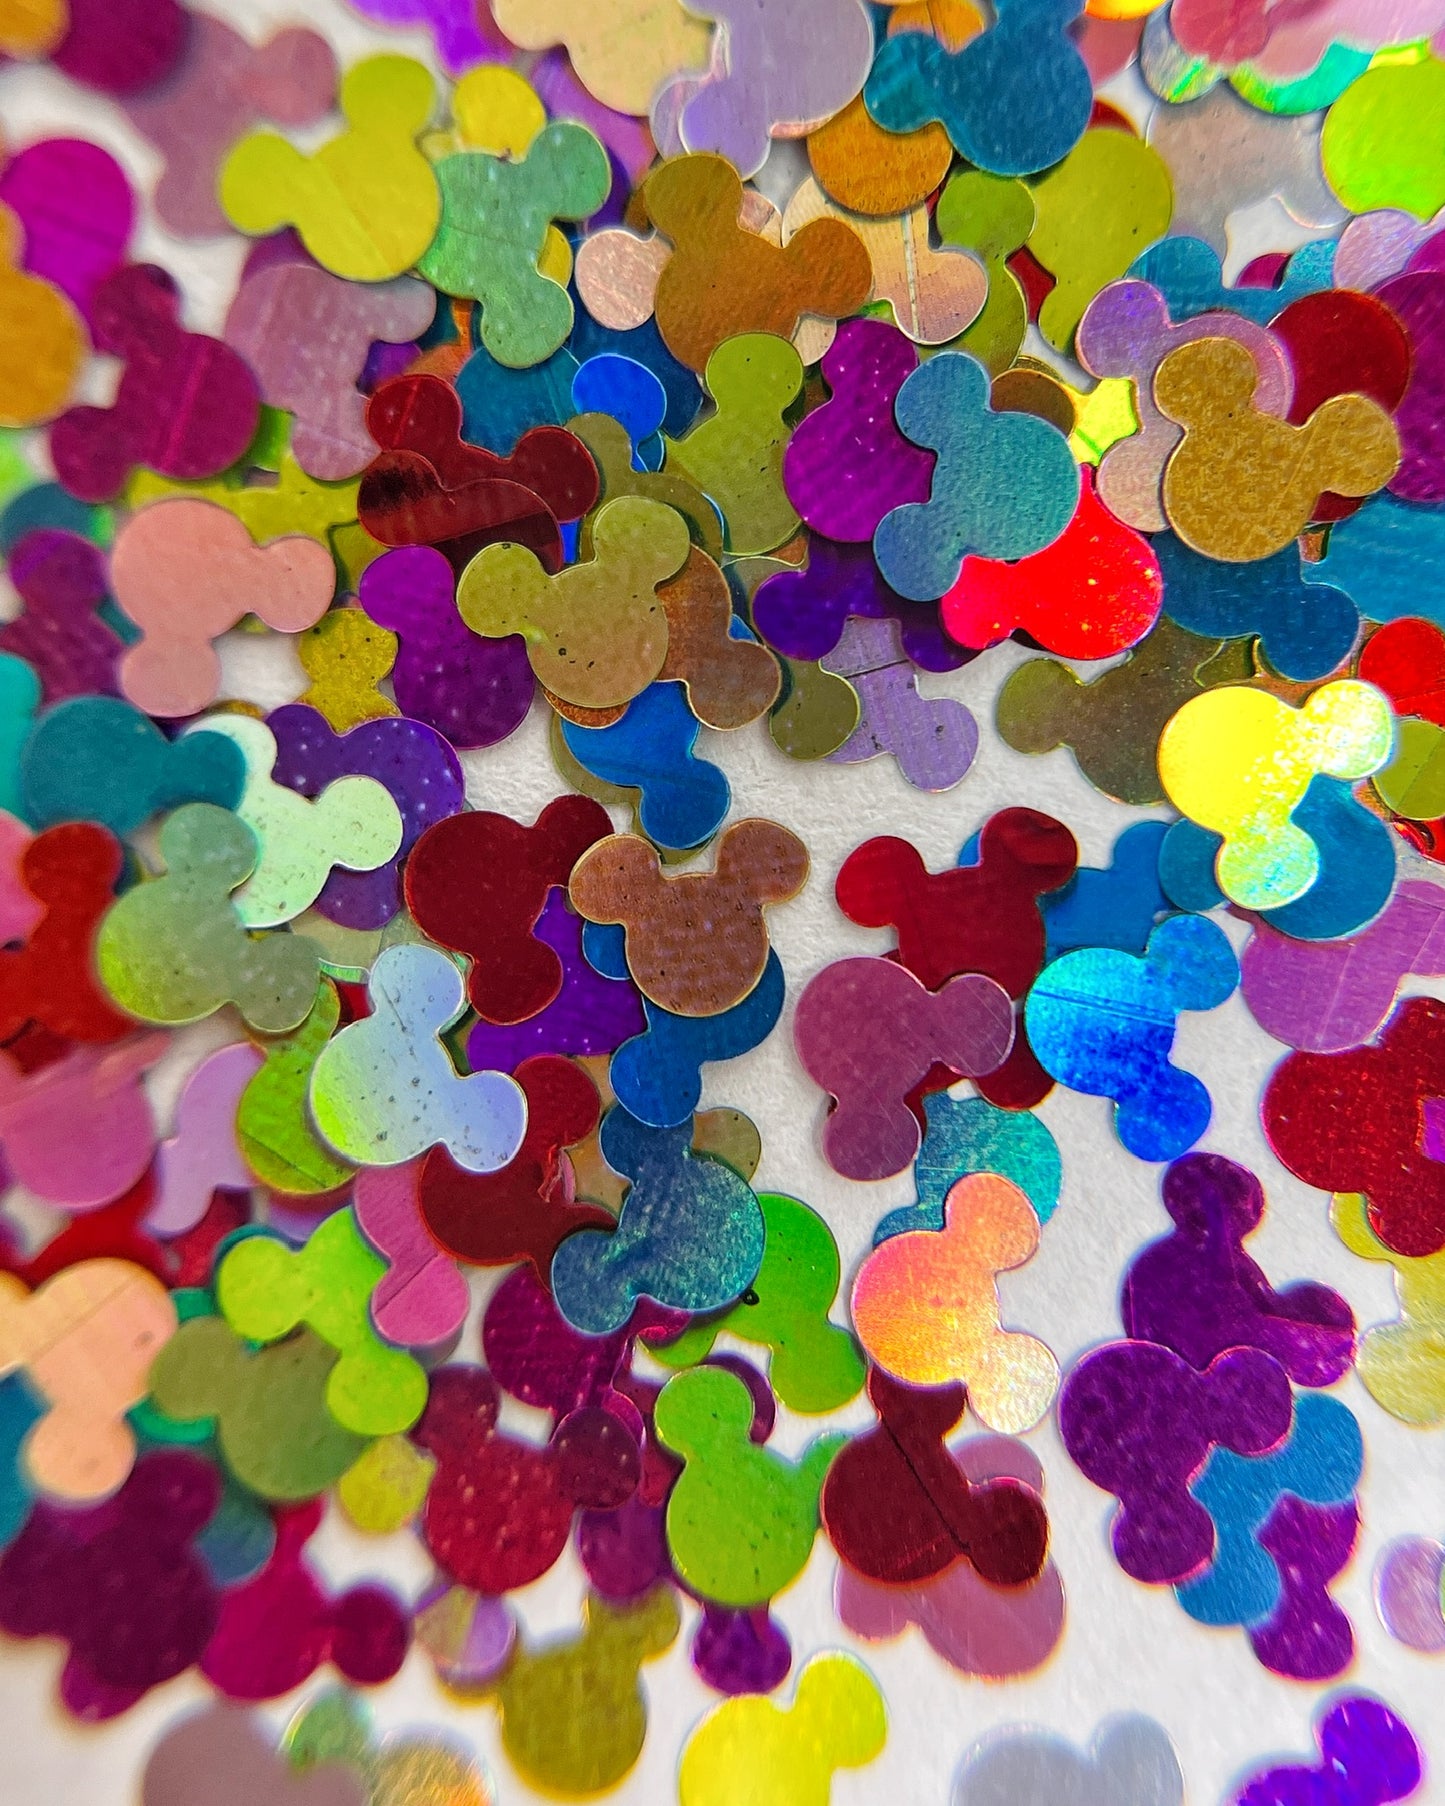 Mutlicolor glitter mix scattered on white background. 